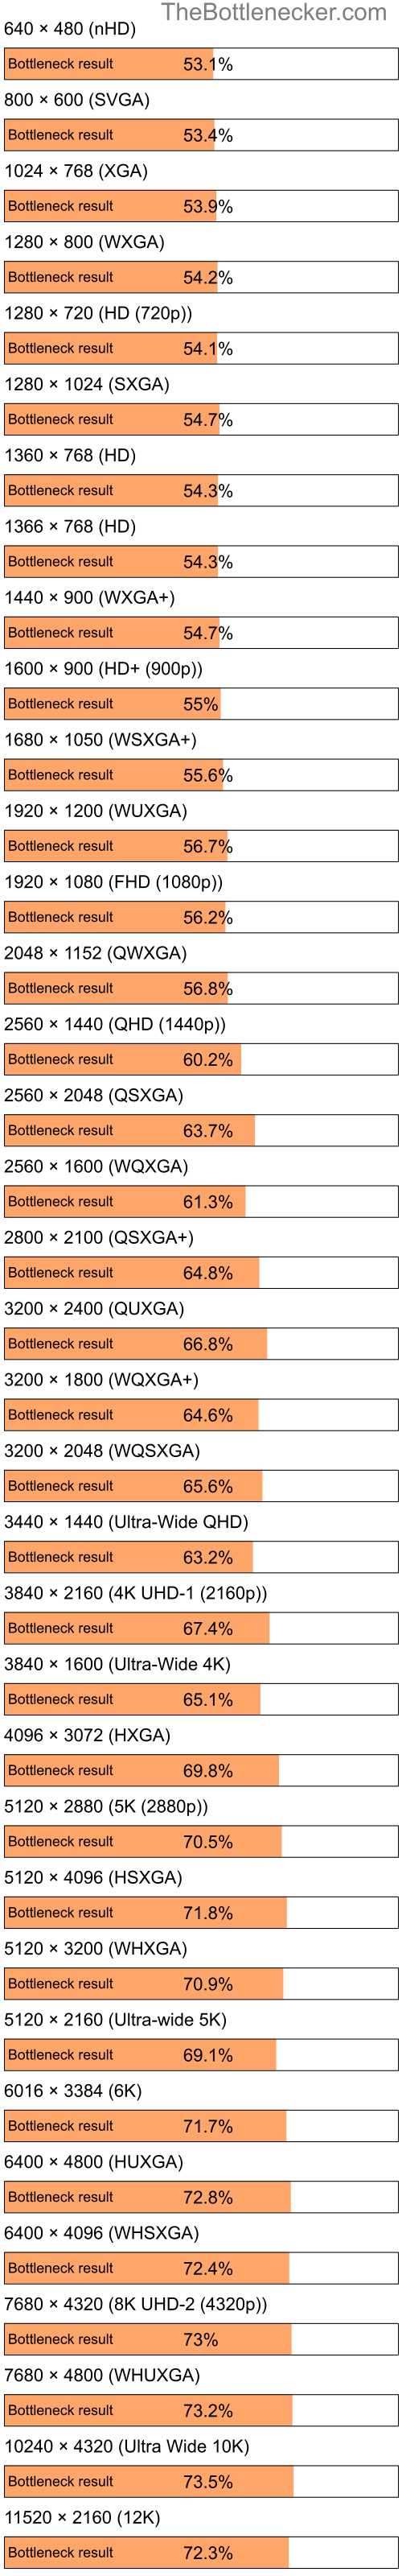 Bottleneck results by resolution for Intel Pentium 4 and NVIDIA GeForce Go 6800 in Processor Intense Tasks